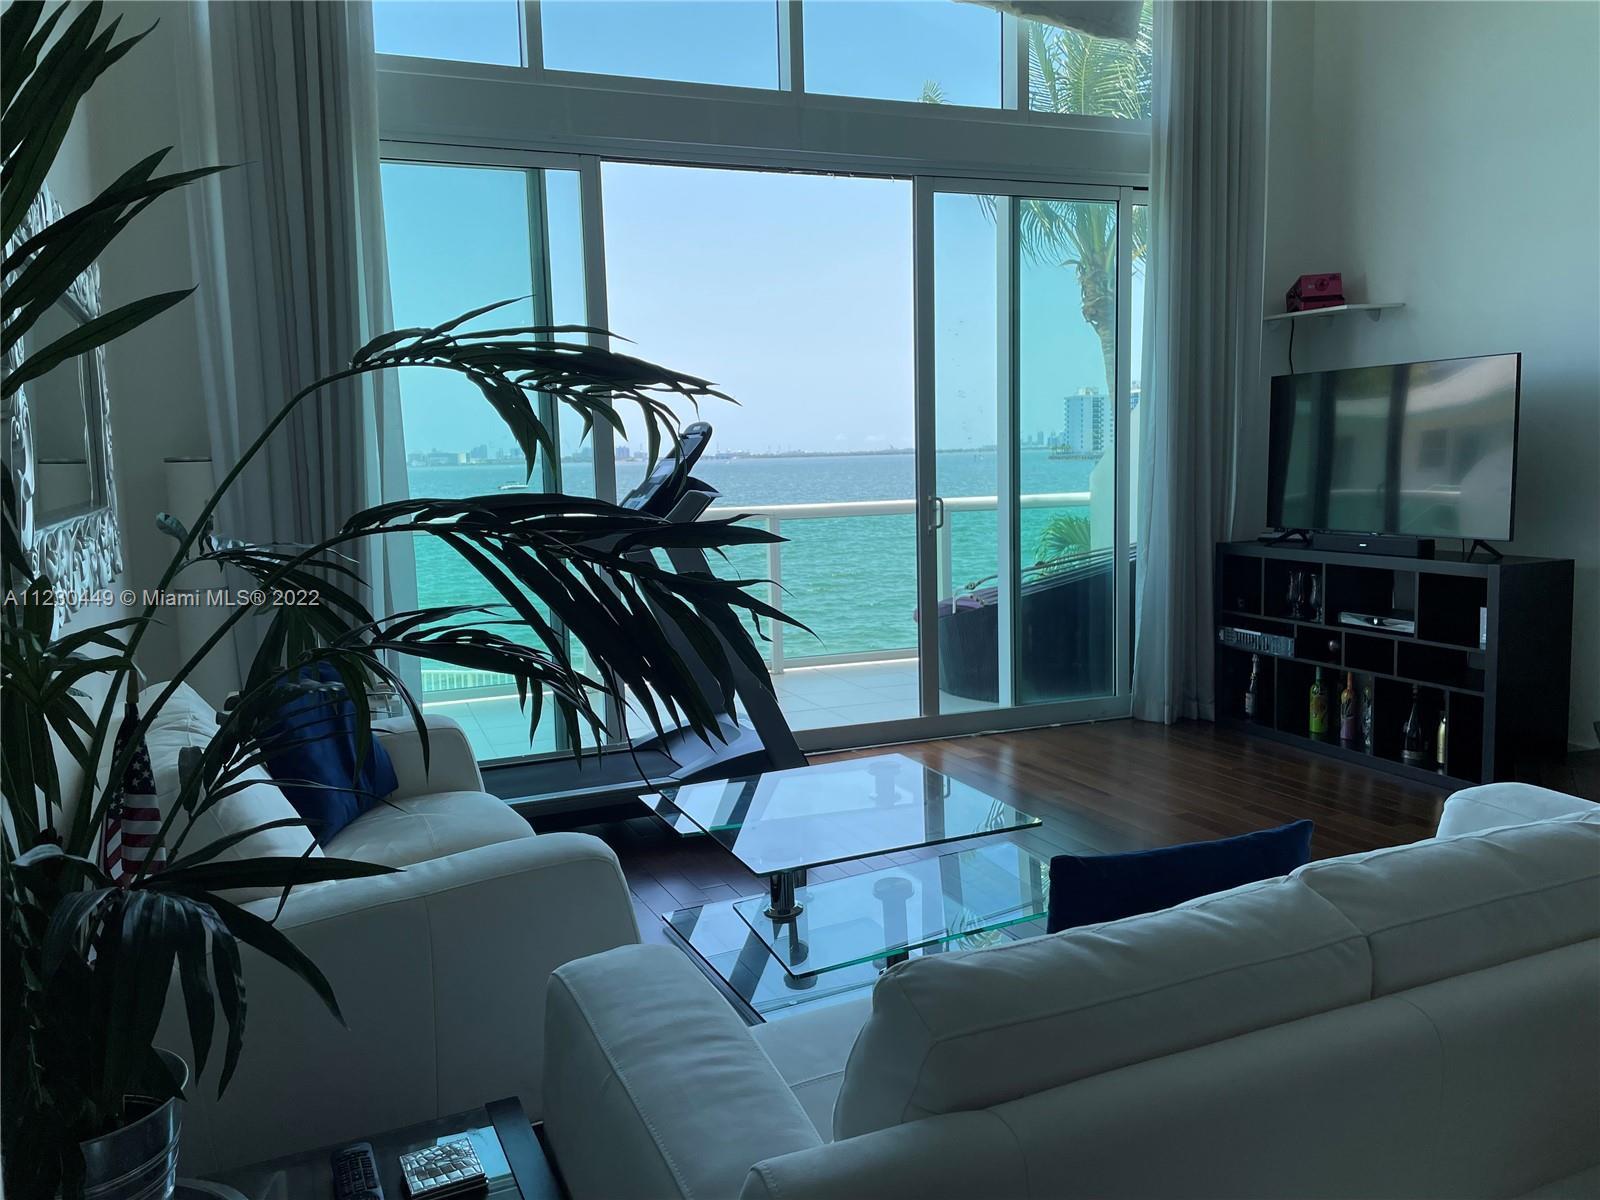 Fall in love with and make this your next dream home! Unobstructed & magnificent views of Biscayne B